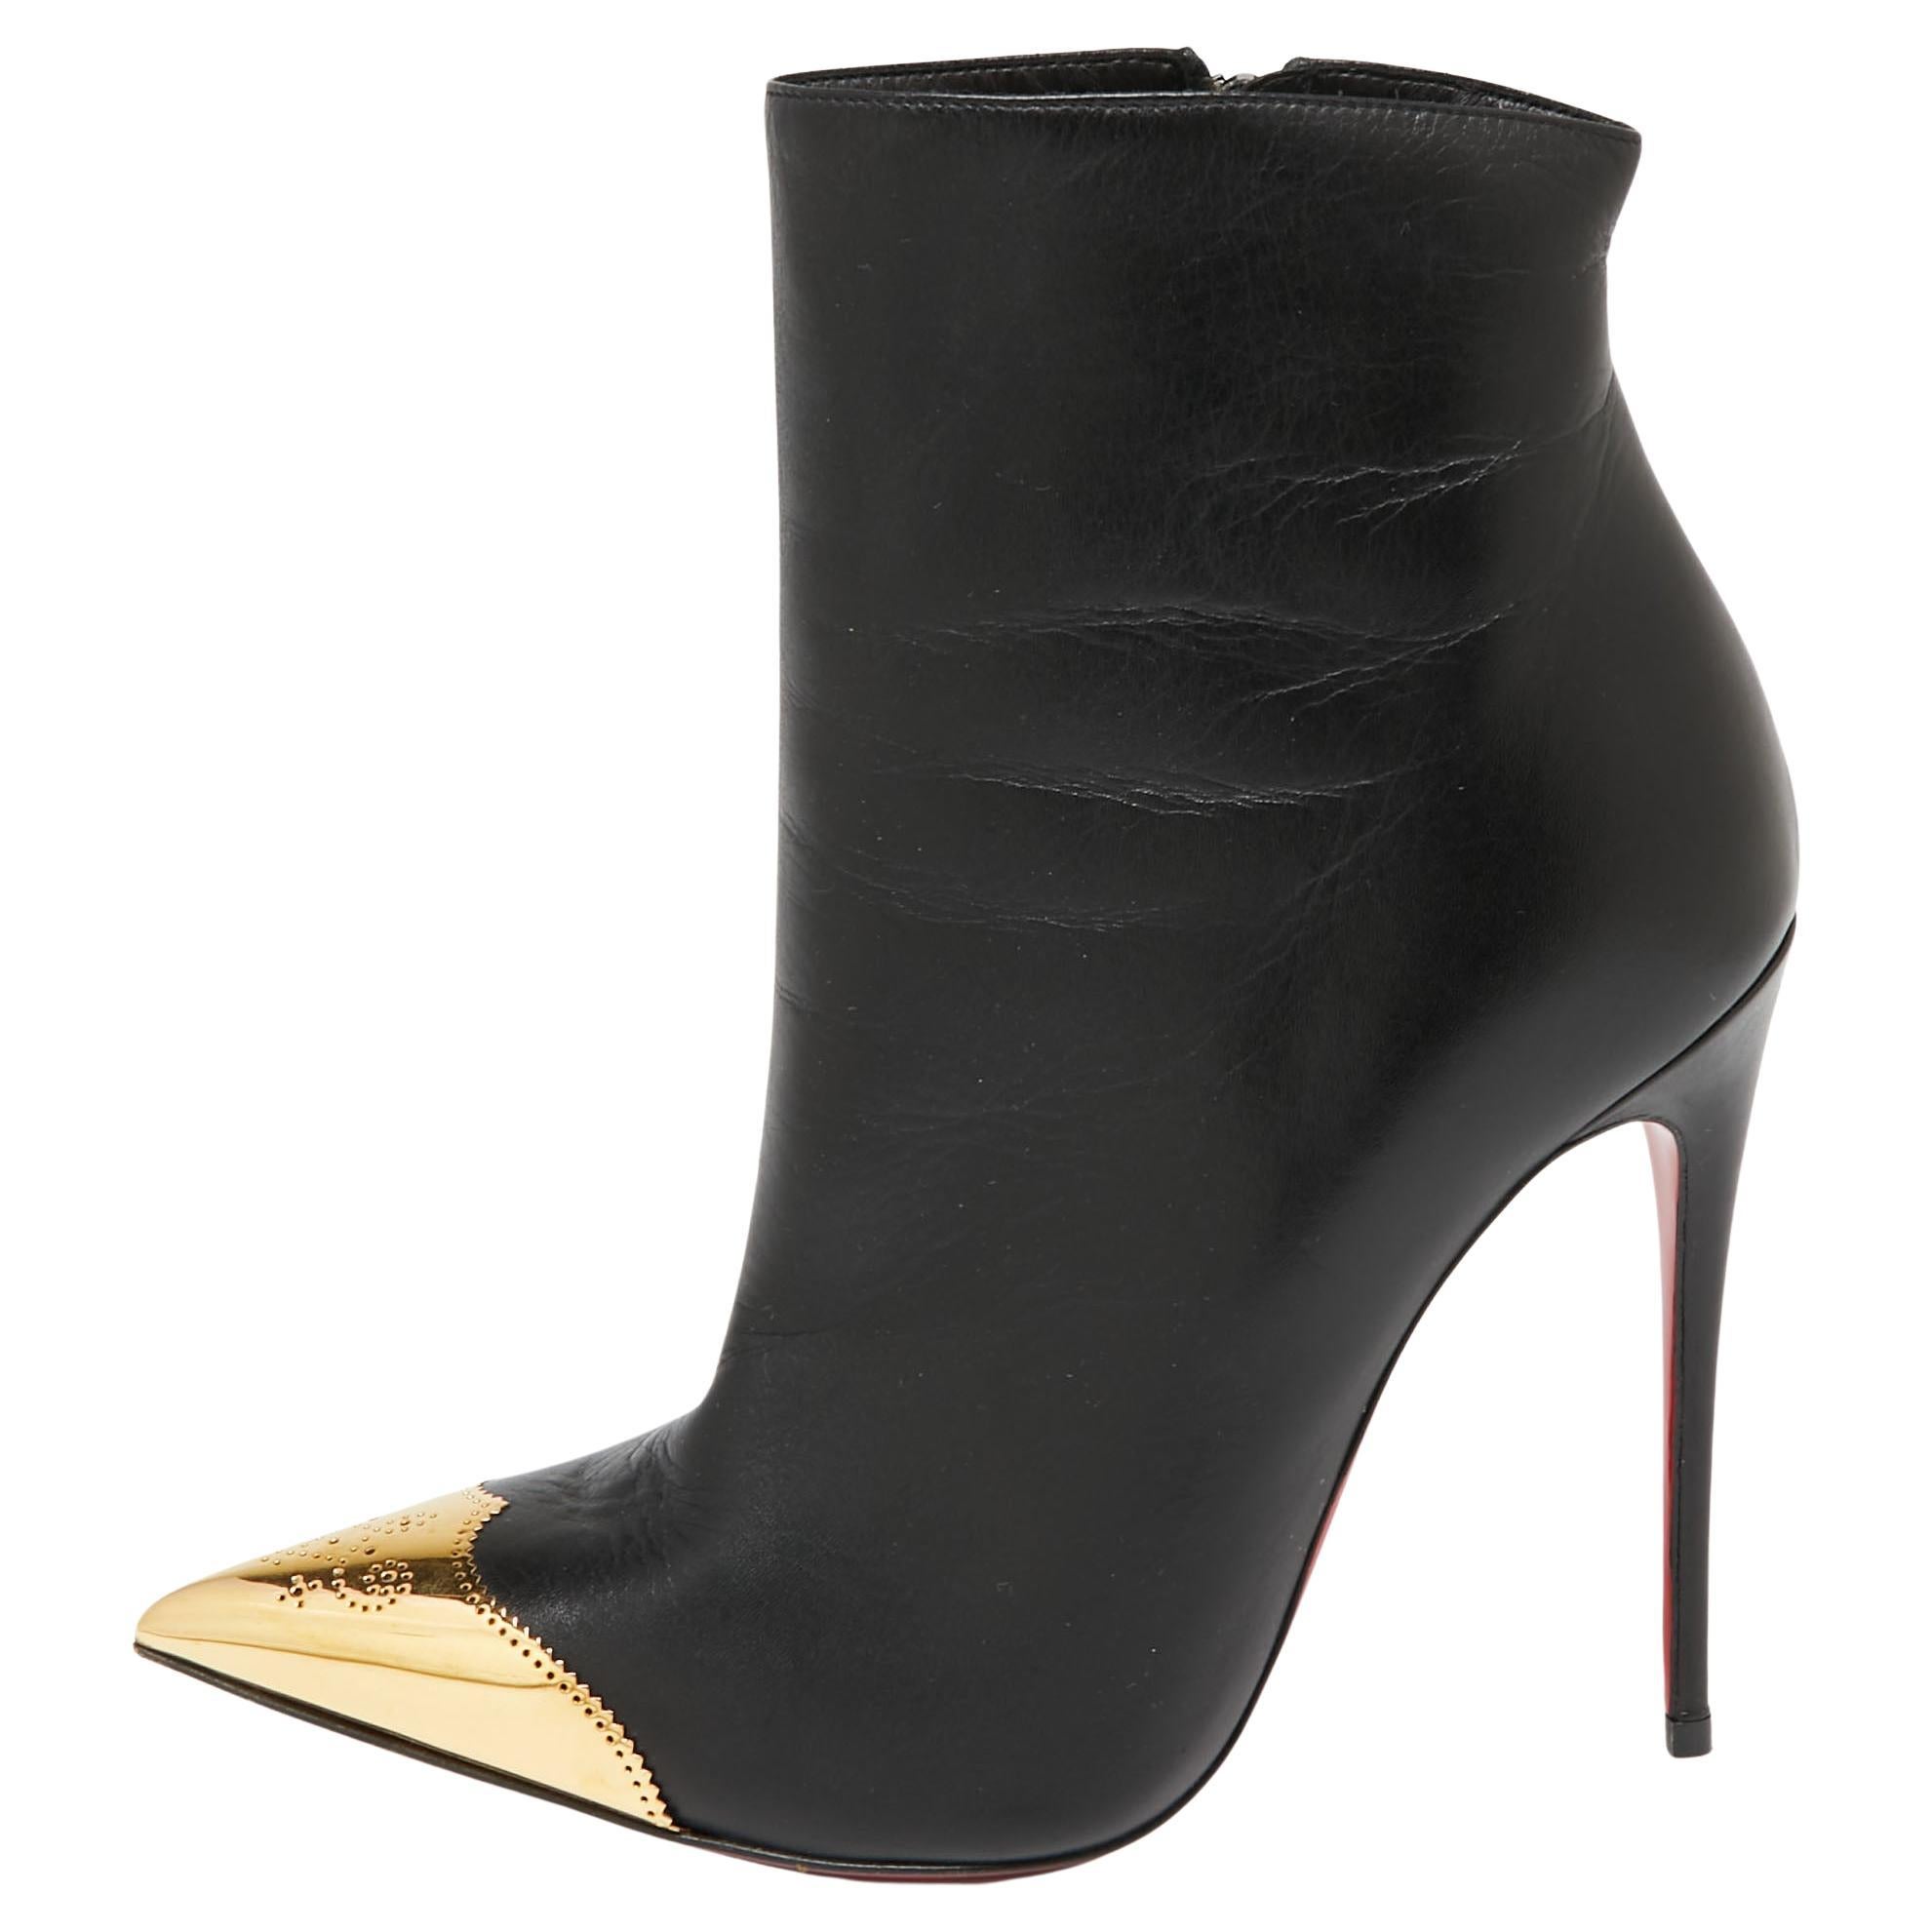 Christian Louboutin Black Leather Calamijane Pointed-Toe Ankle Booties Size 35.5 For Sale